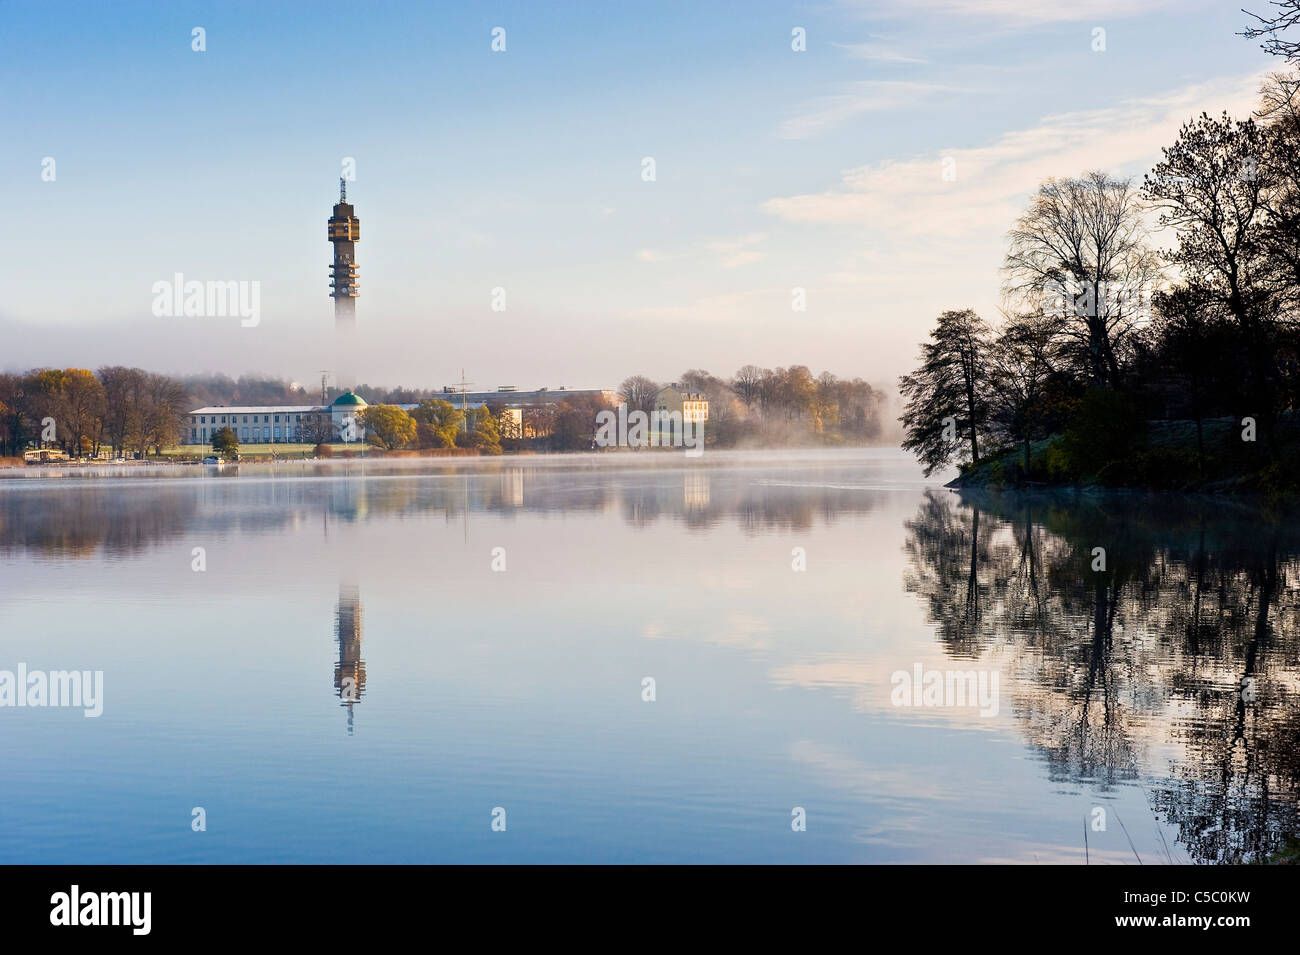 KaknÃ¤stornet tower in morning fog at a distance with reflection in peaceful water Stock Photo